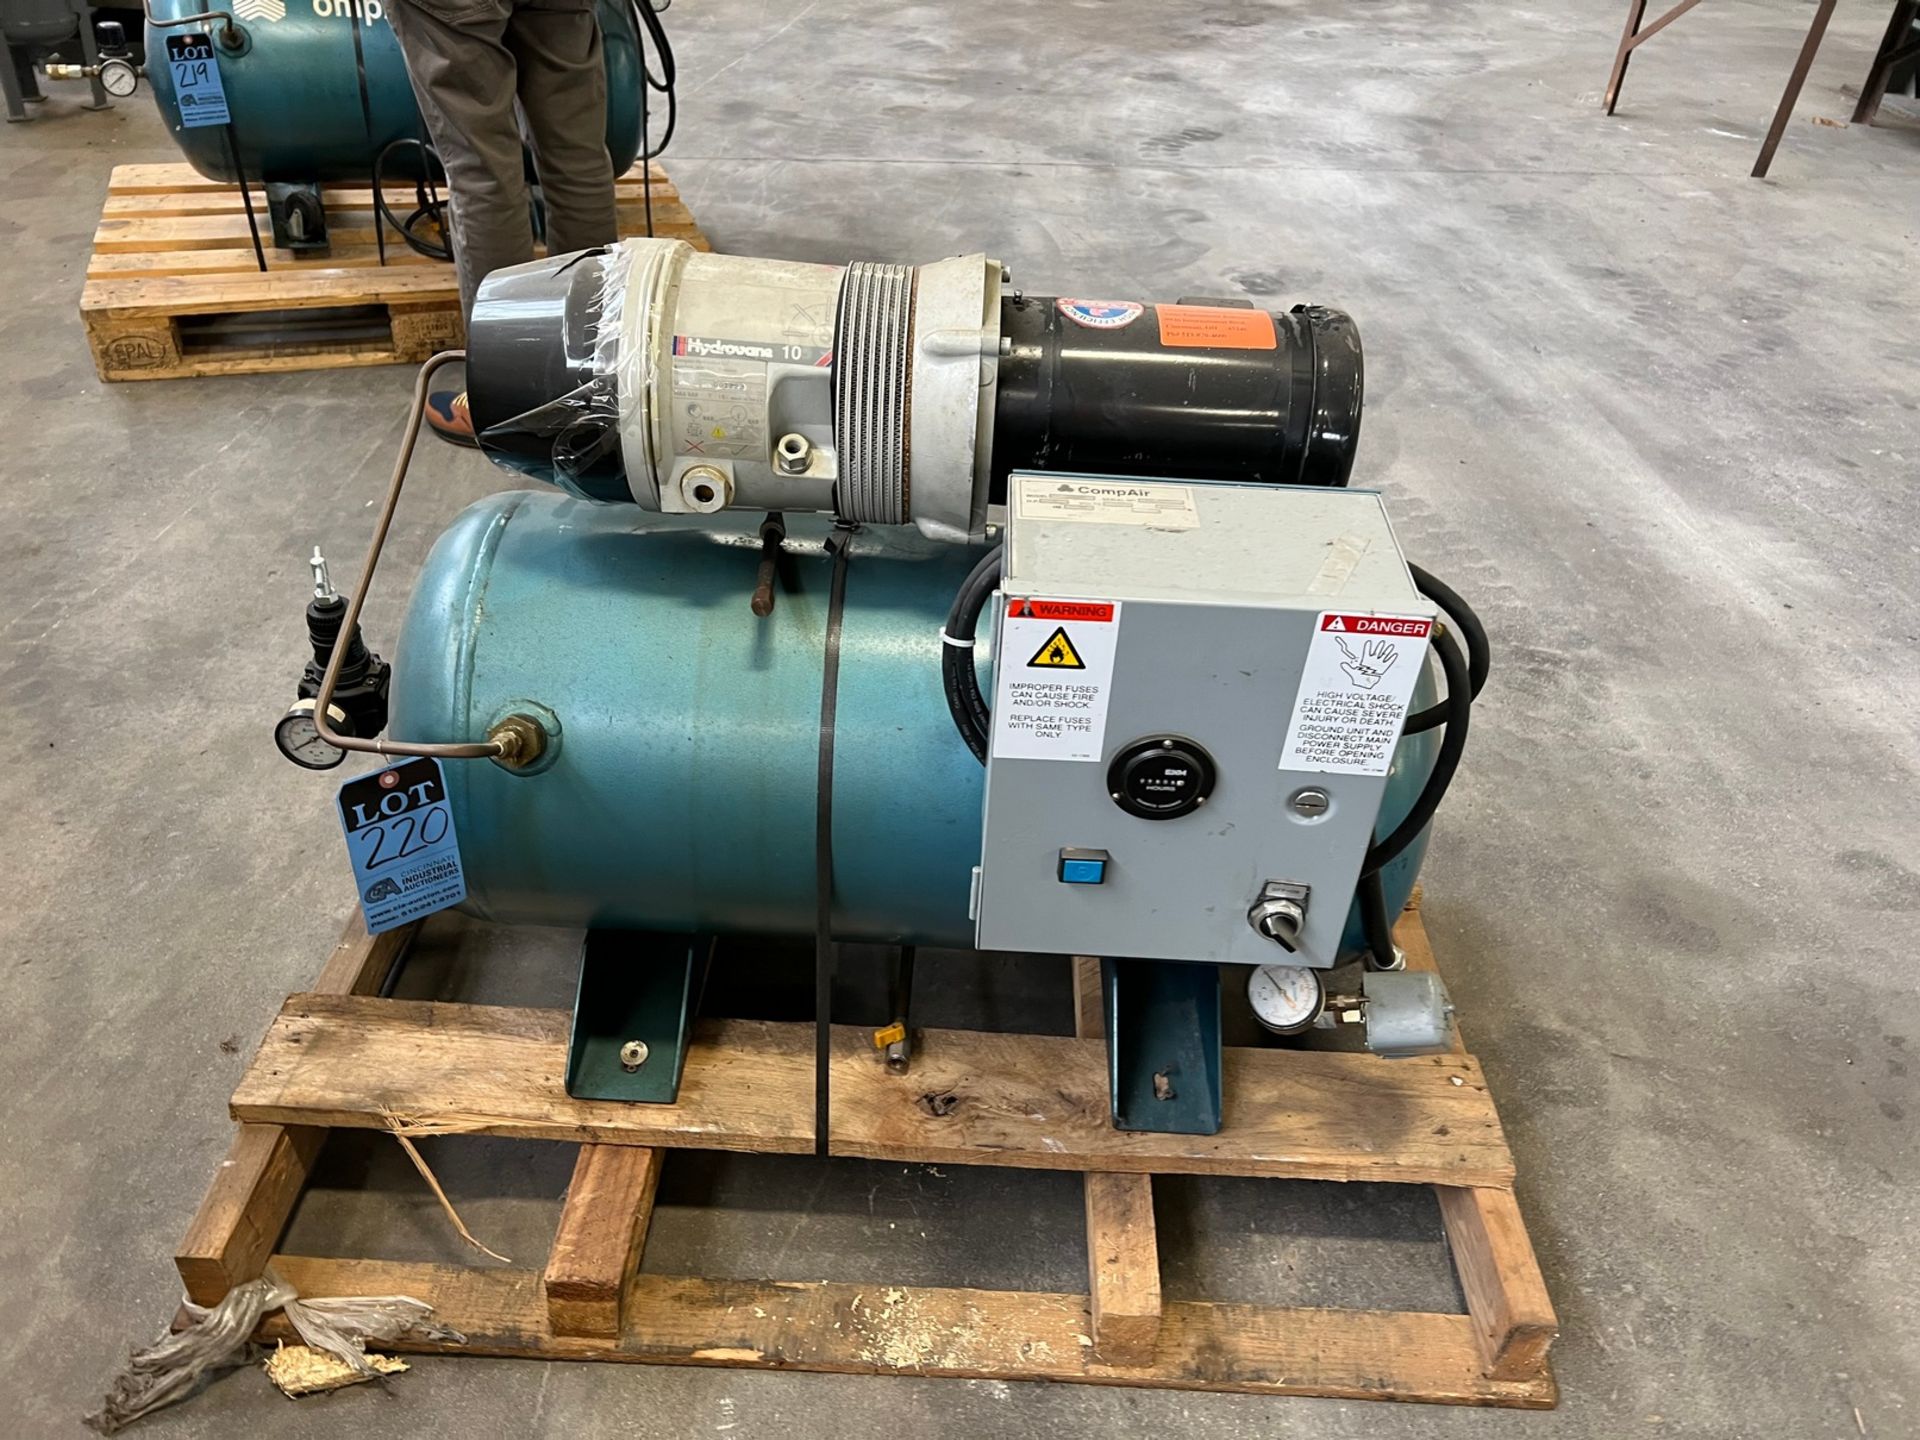 2 HP COMPAIR MODEL 10 PURS HYDROVANE ROTARY VAN TANK MOUNTED COMPRESSOR, 230 VOLT, 1-PHASE - Image 2 of 8